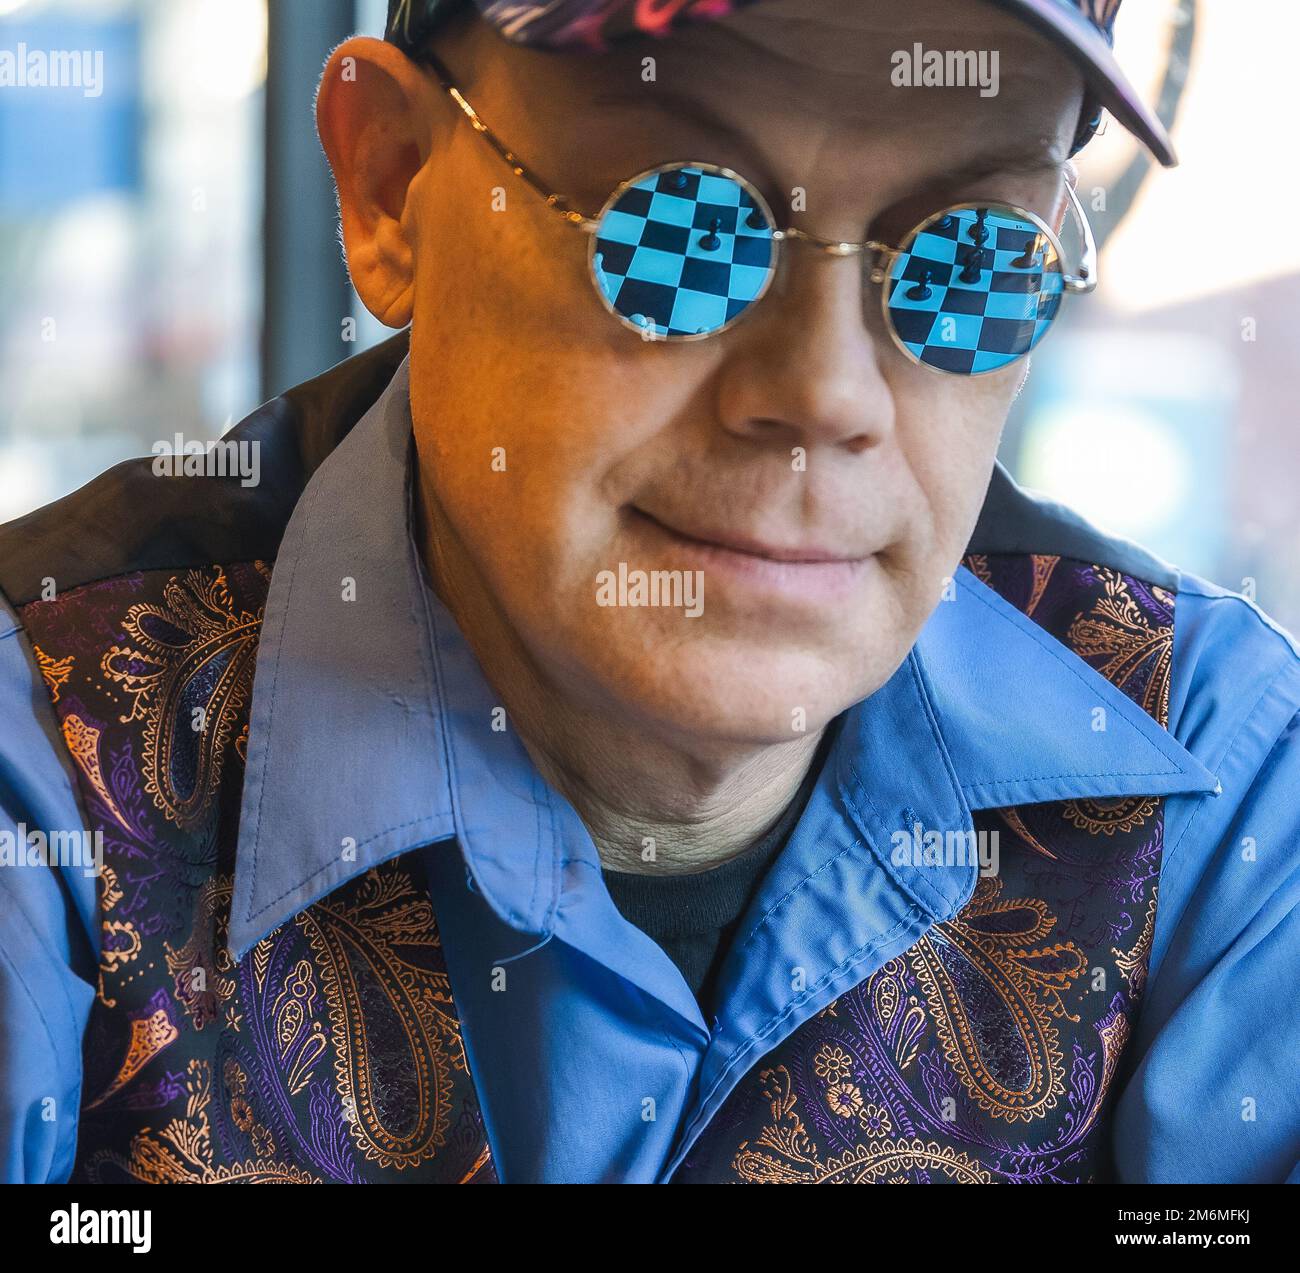 A man with indoor sunglasses reflecting a chess game Stock Photo